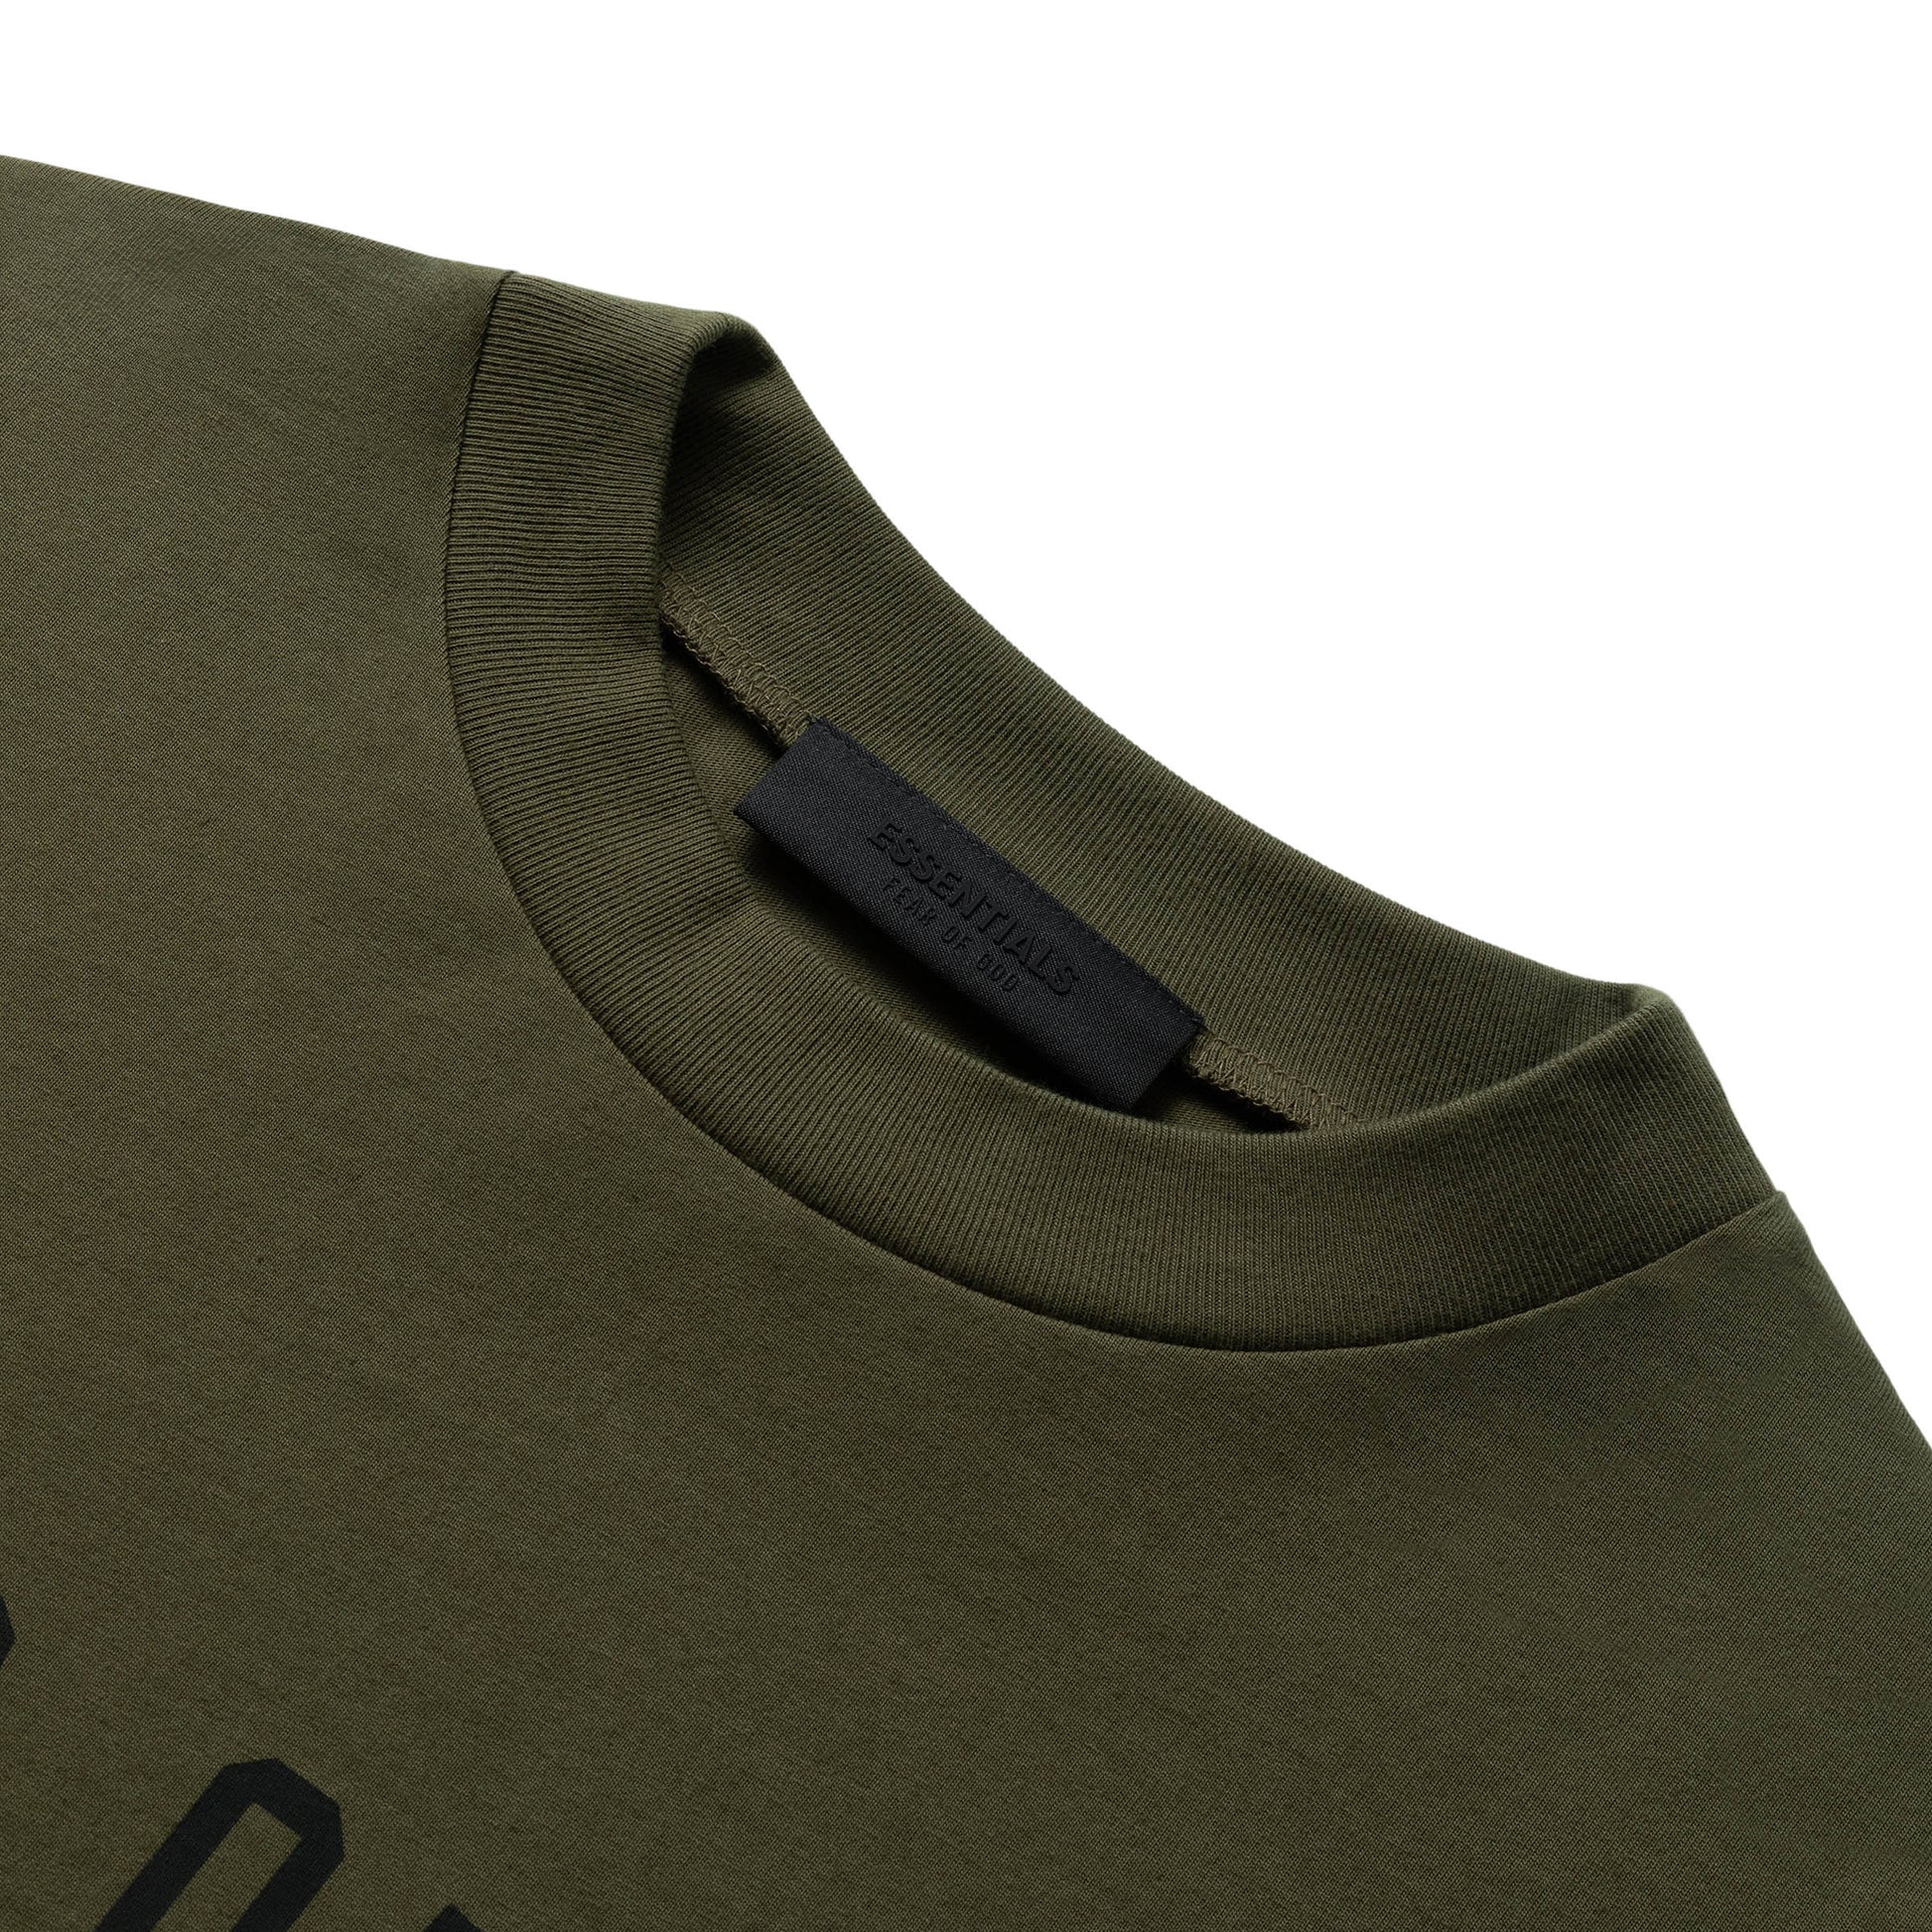 FEAR OF GOD ESSENTIALS JERSEY LONG SLEEVE T-SHIRT OLIVE